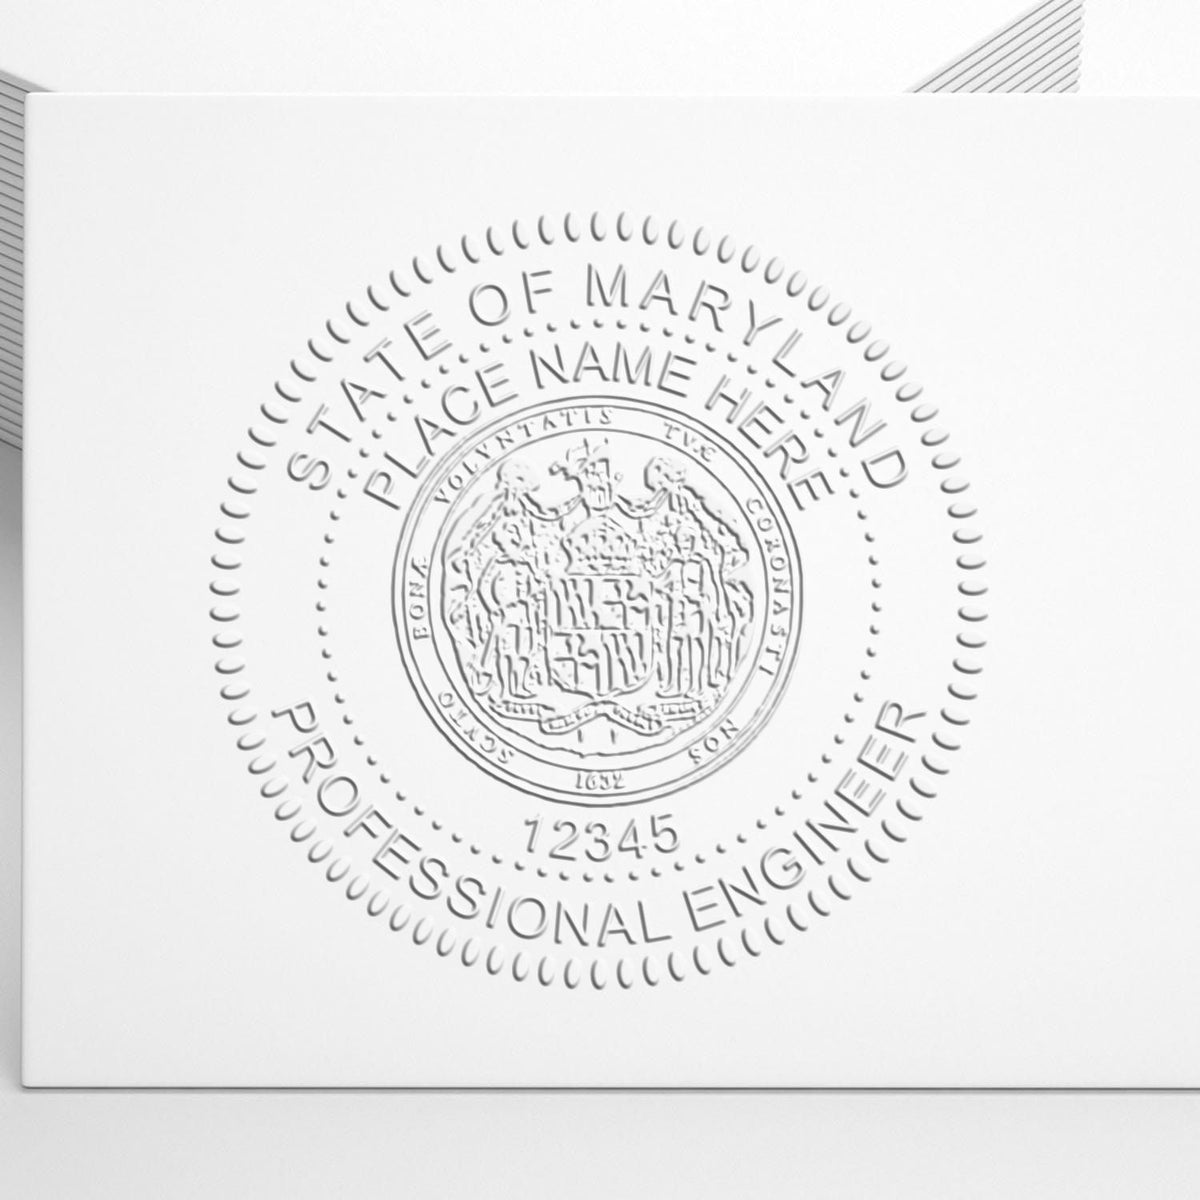 A stamped impression of the Maryland Engineer Desk Seal in this stylish lifestyle photo, setting the tone for a unique and personalized product.